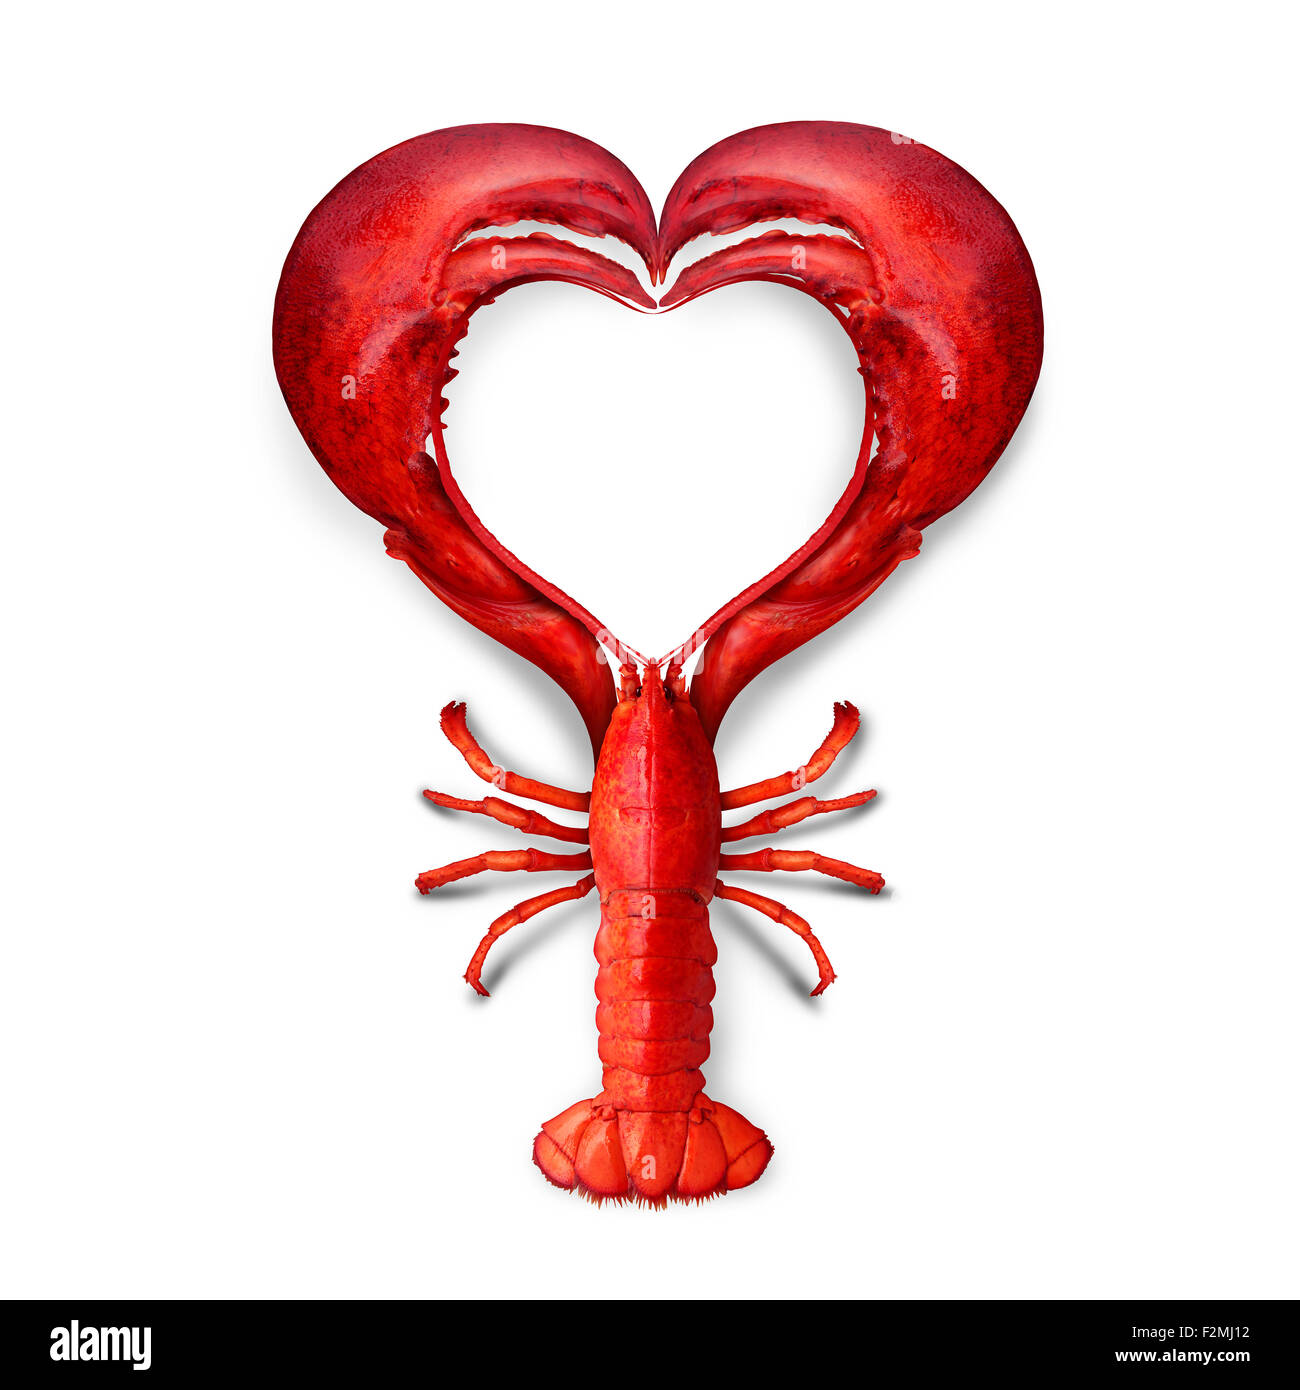 Seafood Love concept as a boiled lobster shaped as a heart symbol as a metaphor for fresh sea food from the ocean or promoting a fish dinner or marketing a restaurant menu. Stock Photo